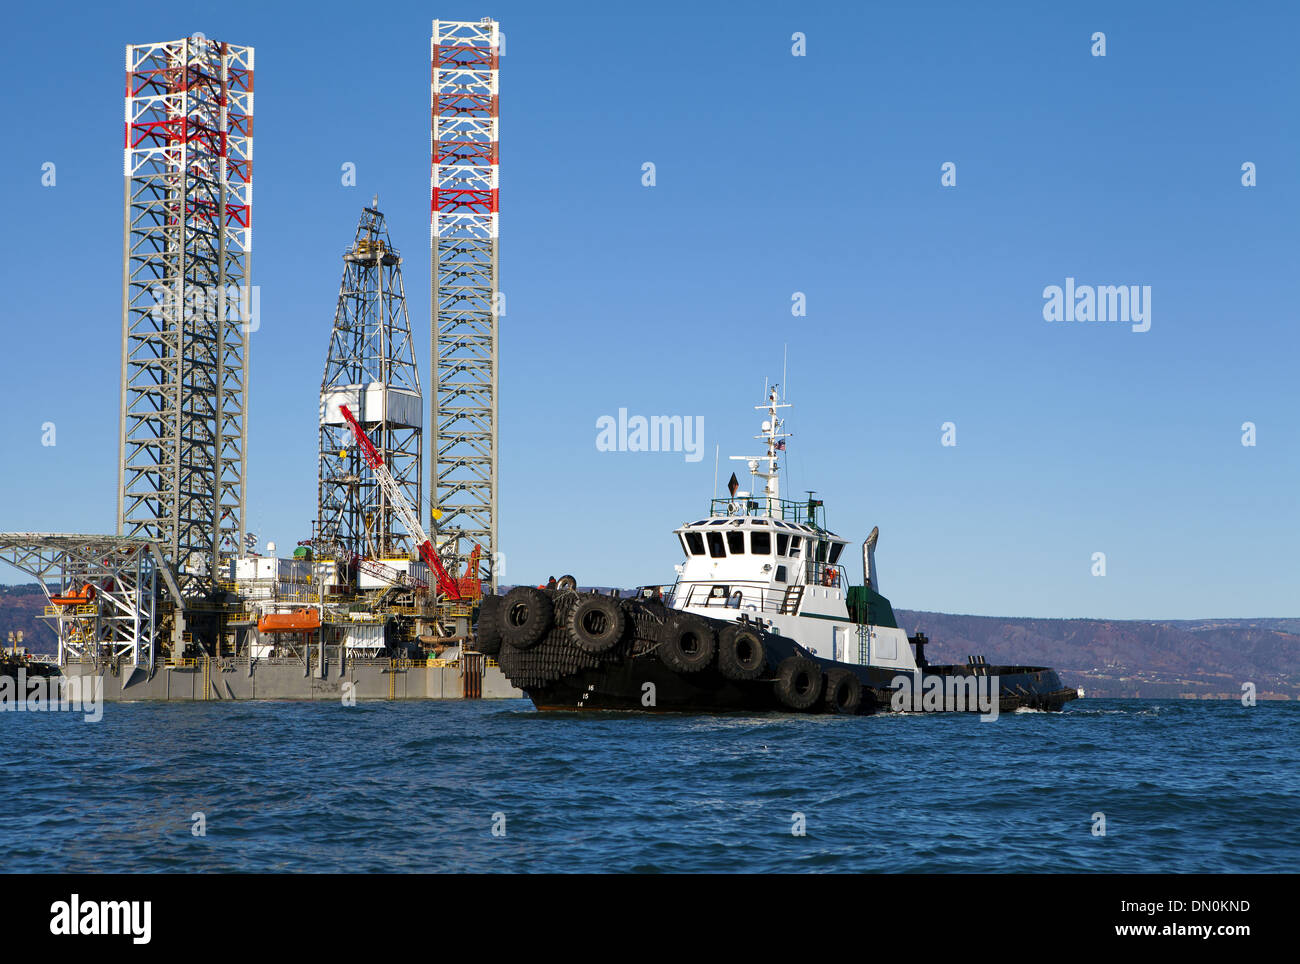 Oil drilling jack up rig with a tug boat in the Kachemak Bay near Homer Alaska on a sunny day. Stock Photo